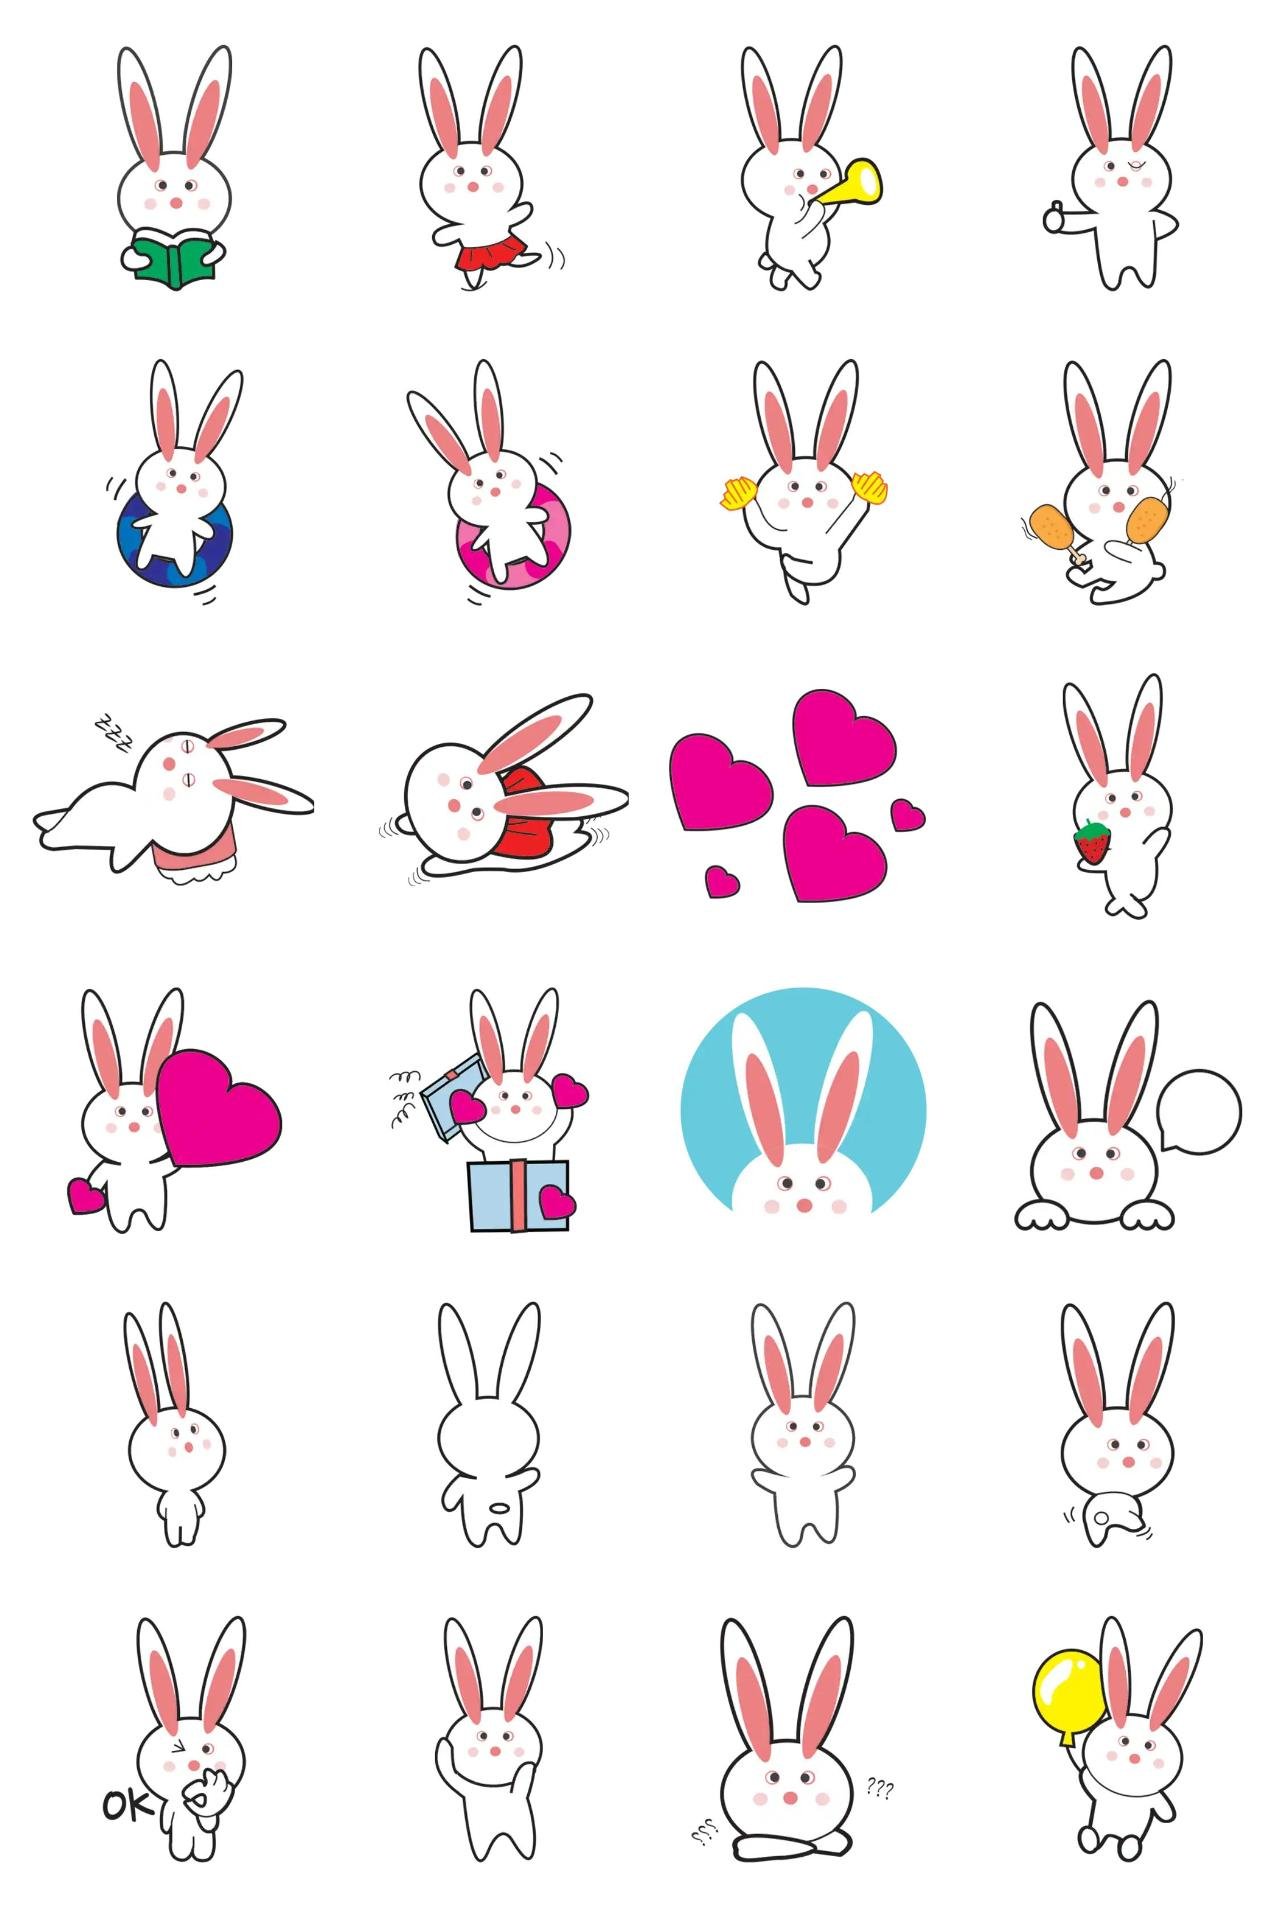 ArcticRabbit Animation/Cartoon,Animals sticker pack for Whatsapp, Telegram, Signal, and others chatting and message apps